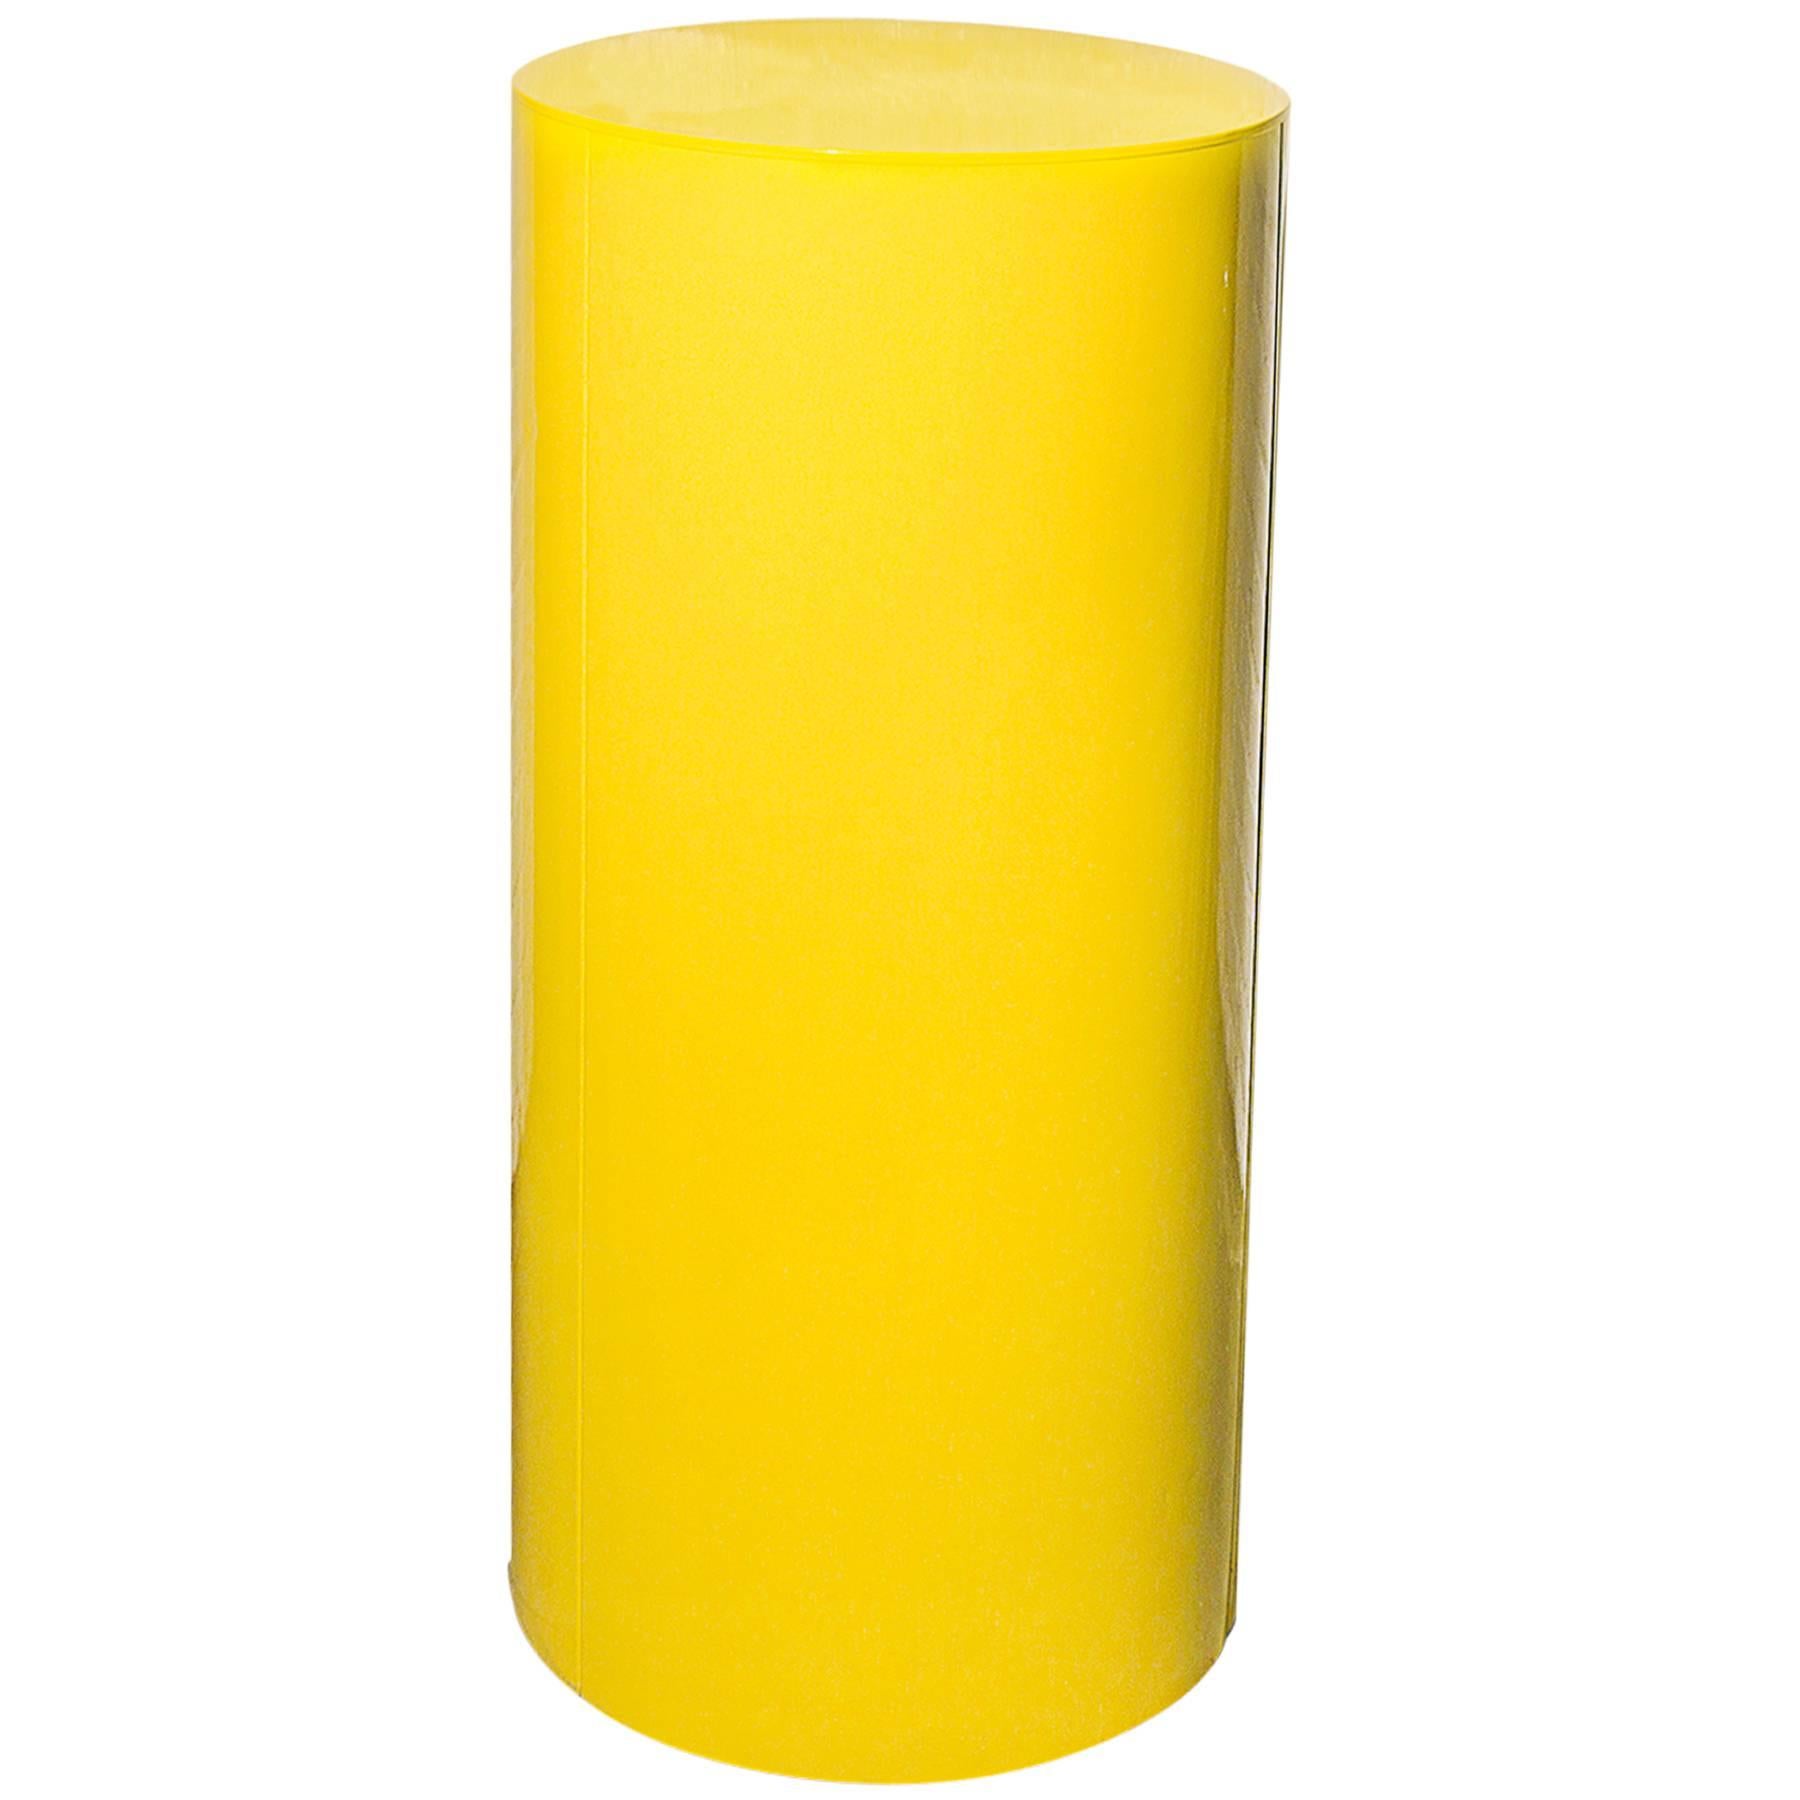 Round Metal Pedestal in Canary Yellow, circa 1970s